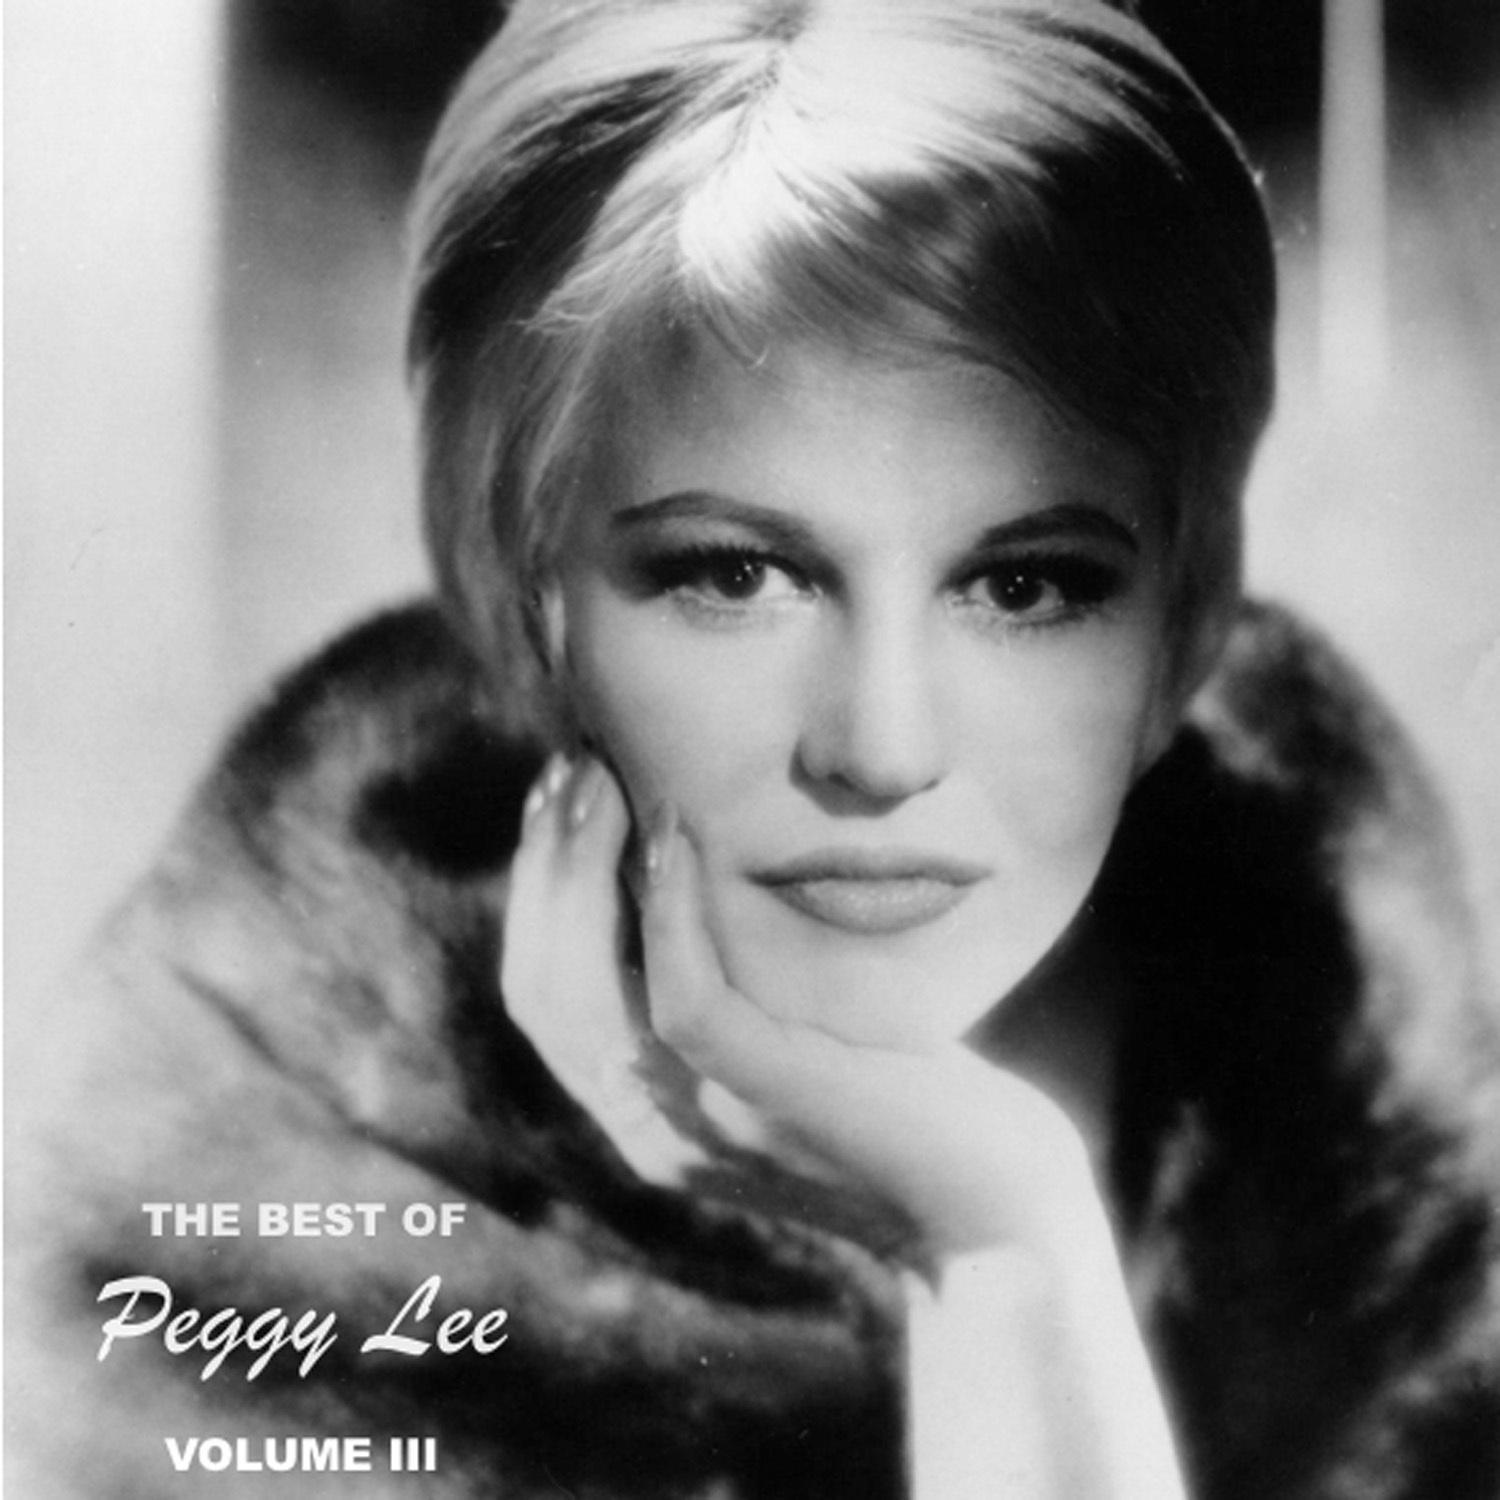 The Best of Peggy Lee, Vol. 3